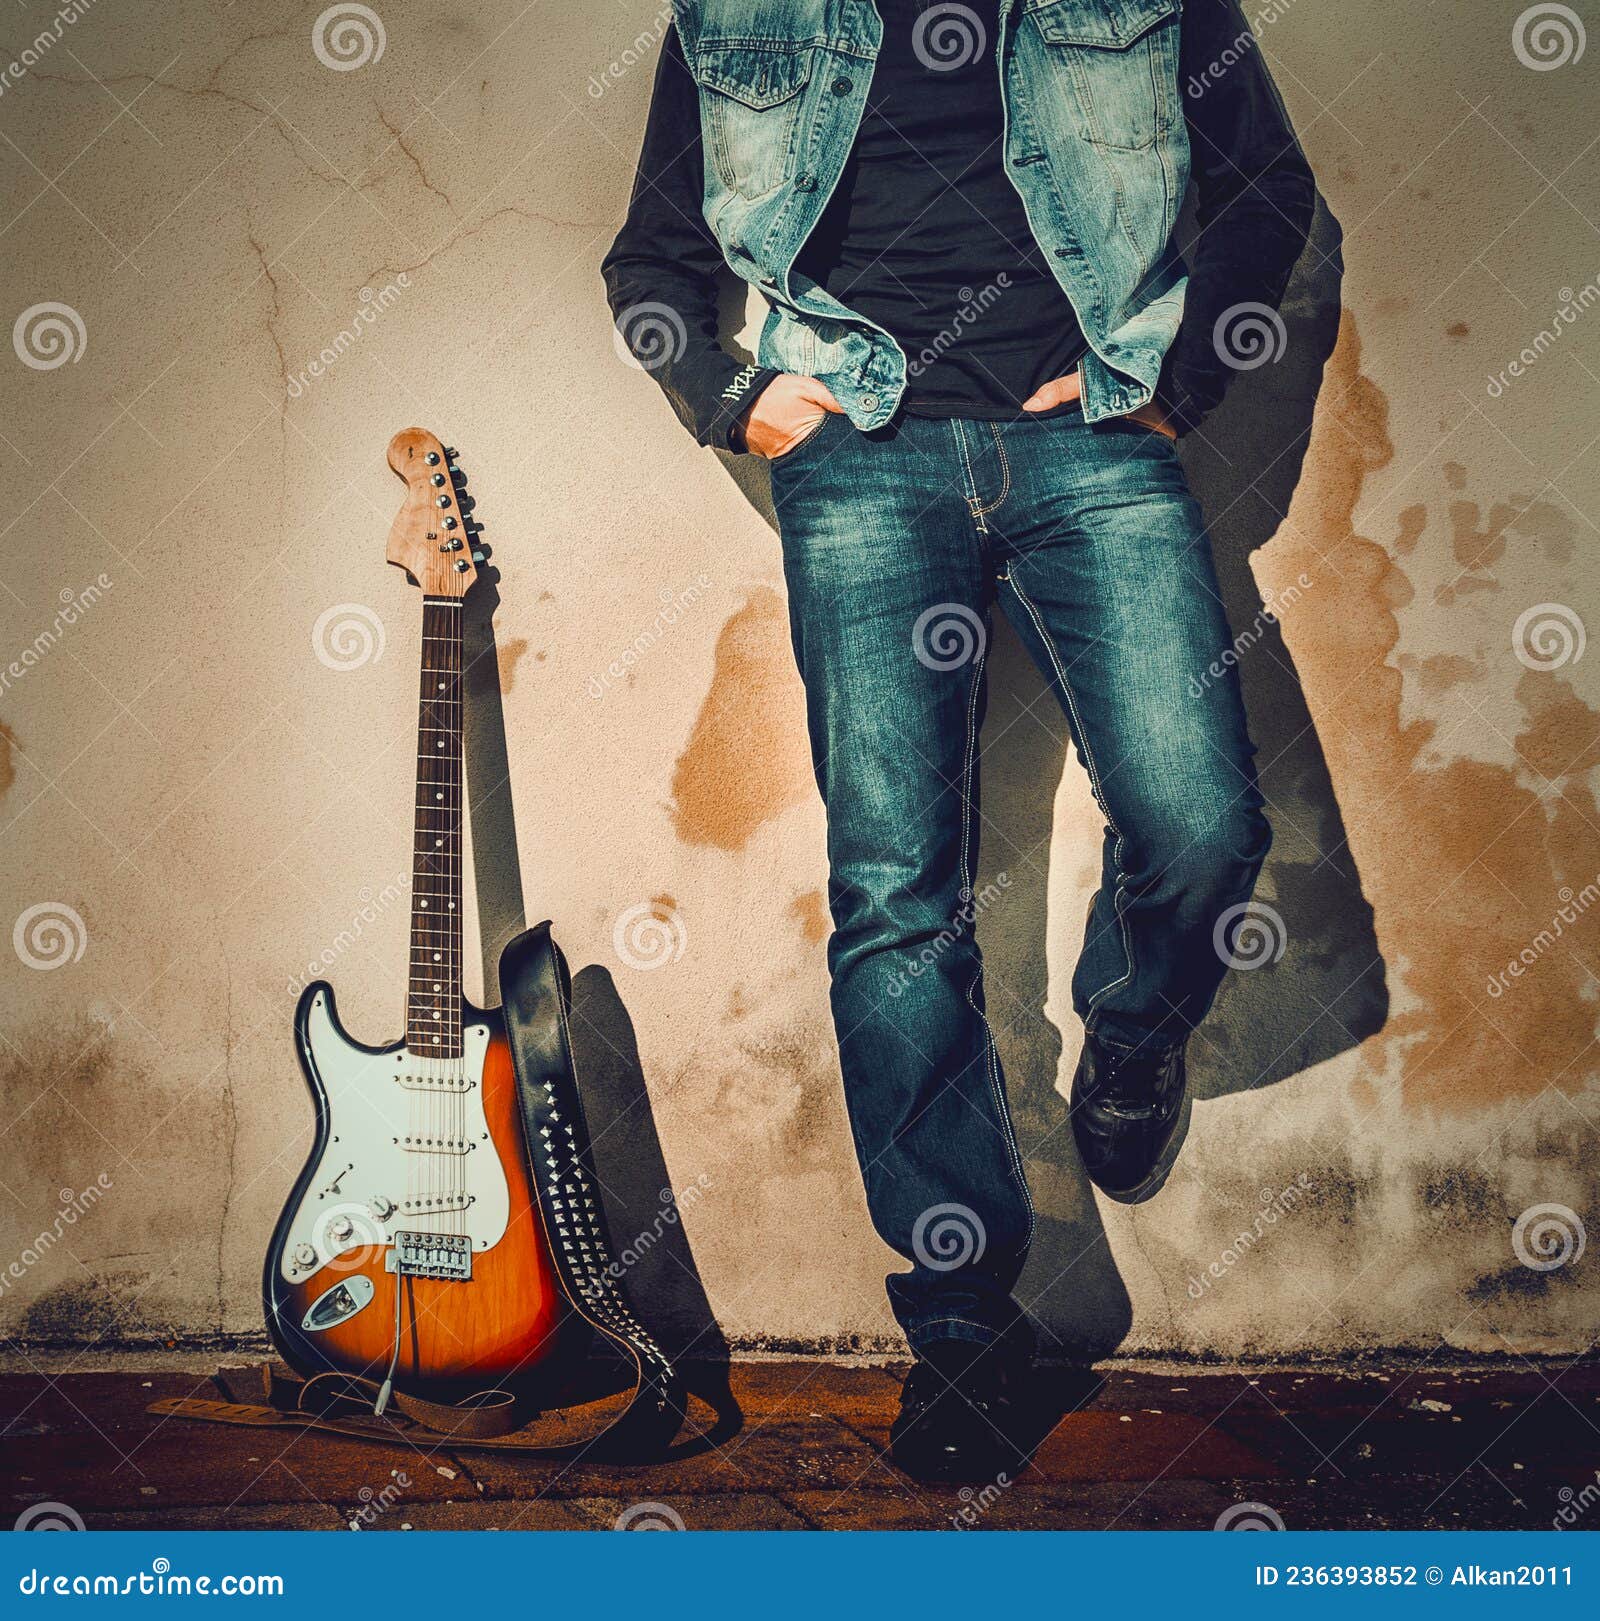 Man and Guitar Leaning on a Grunge Wall Stock Photo - Image of ...